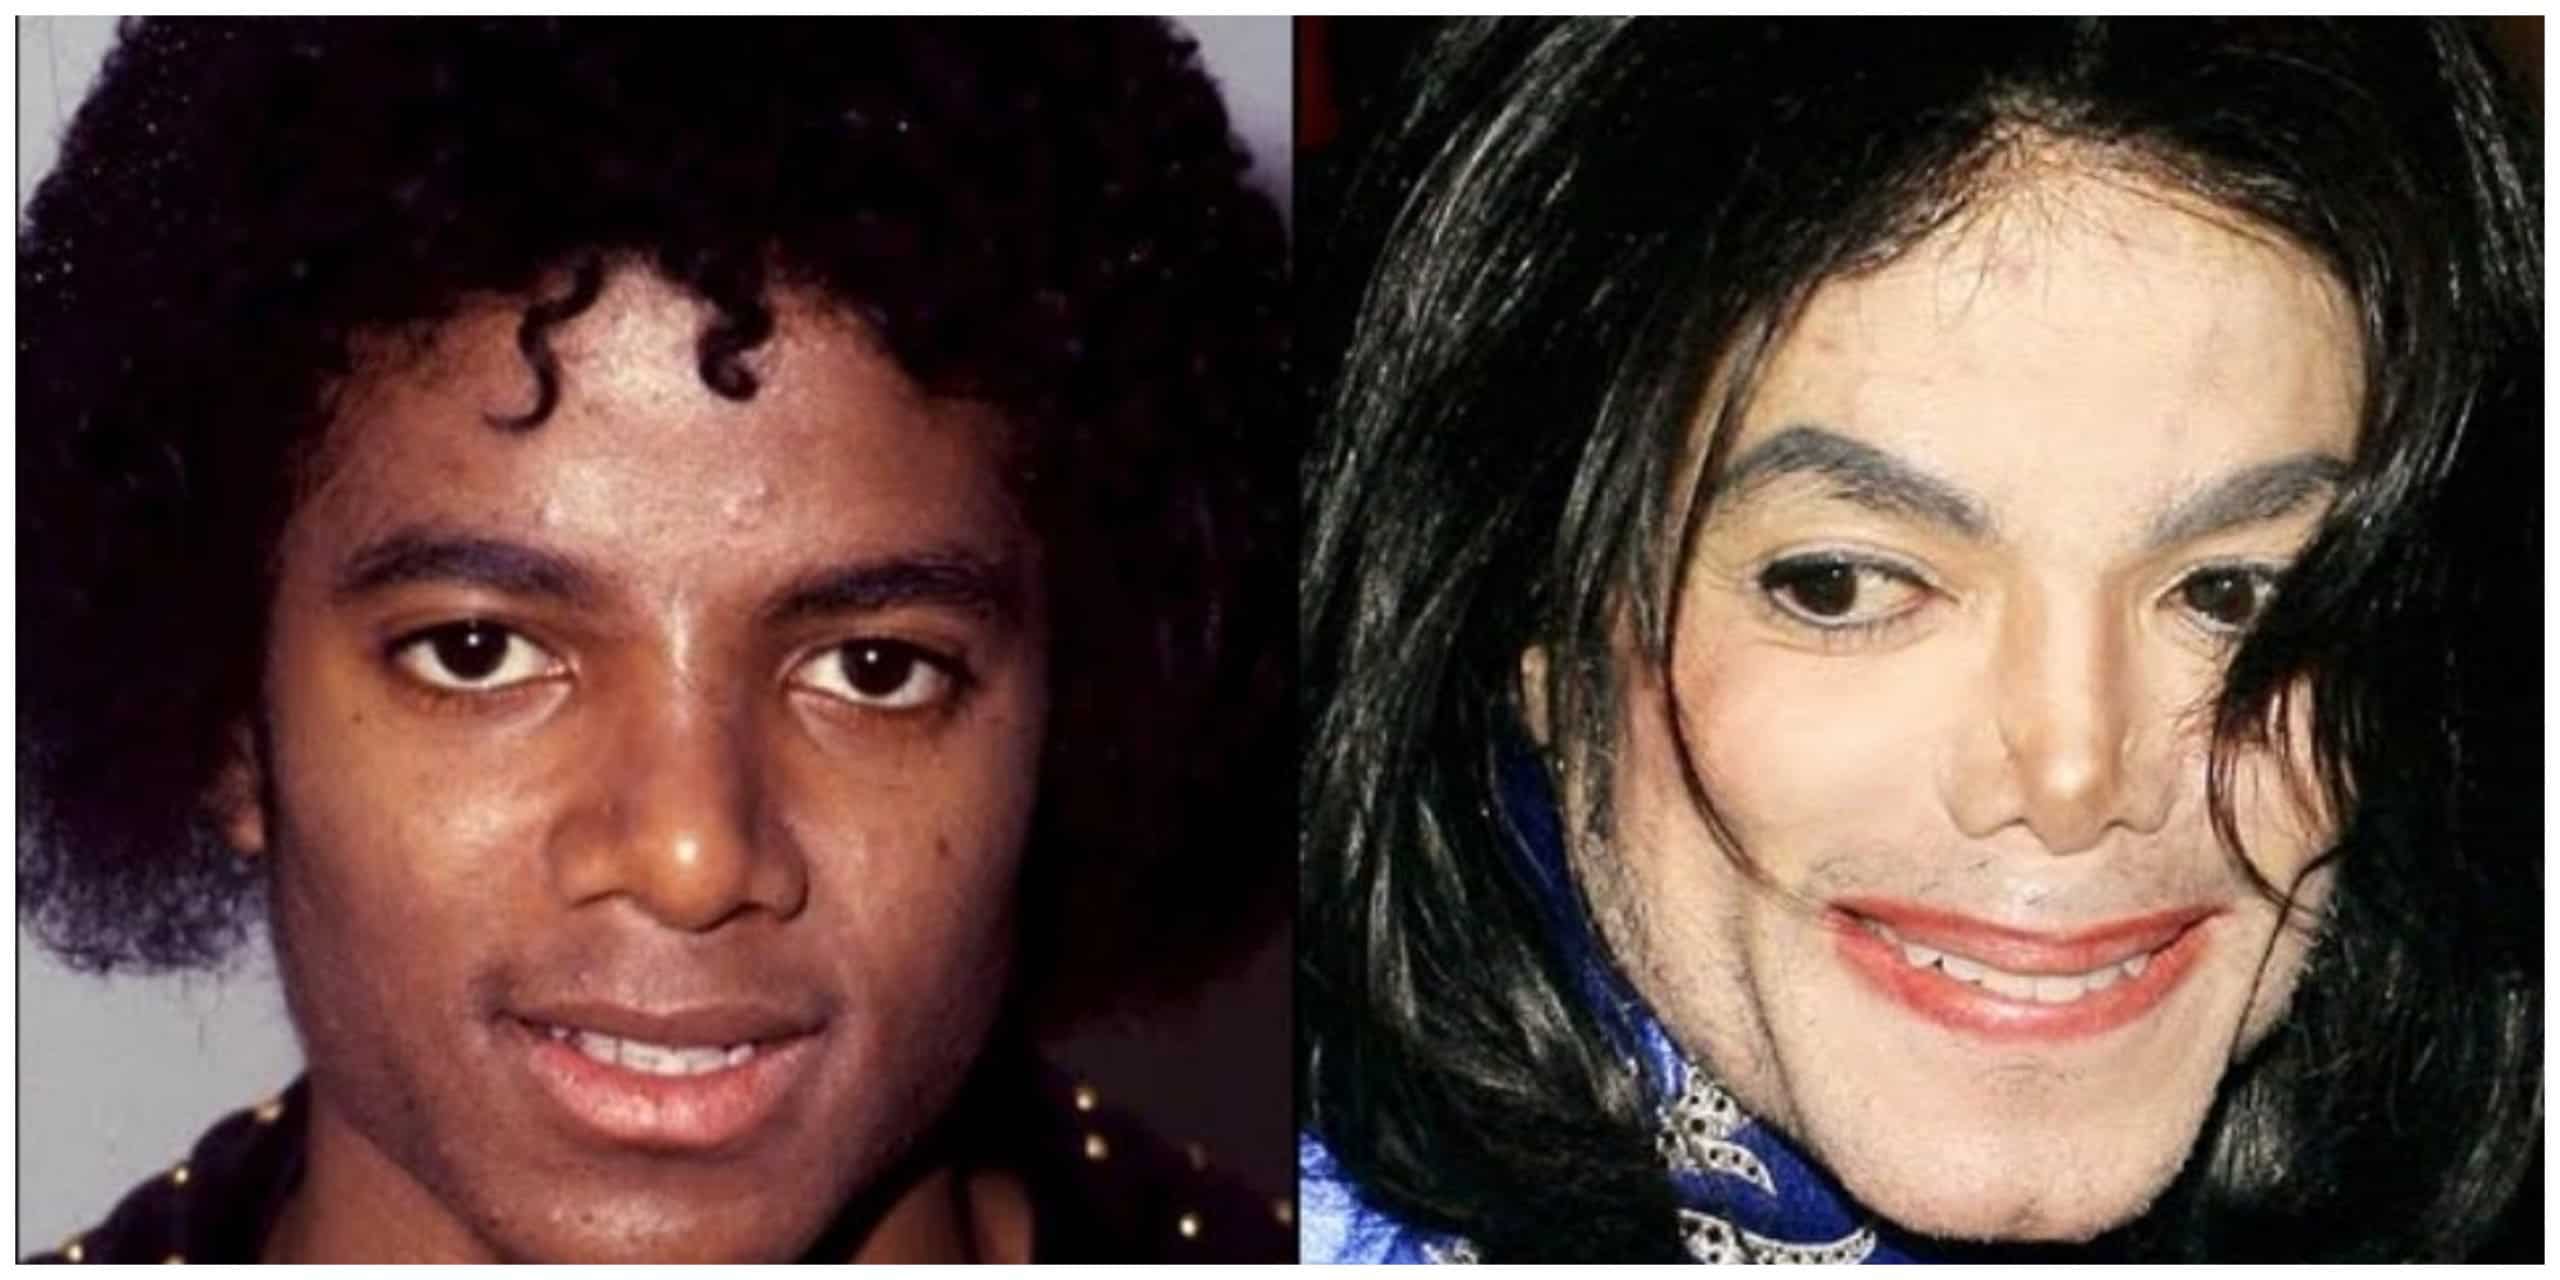 Michael Jackson before and after